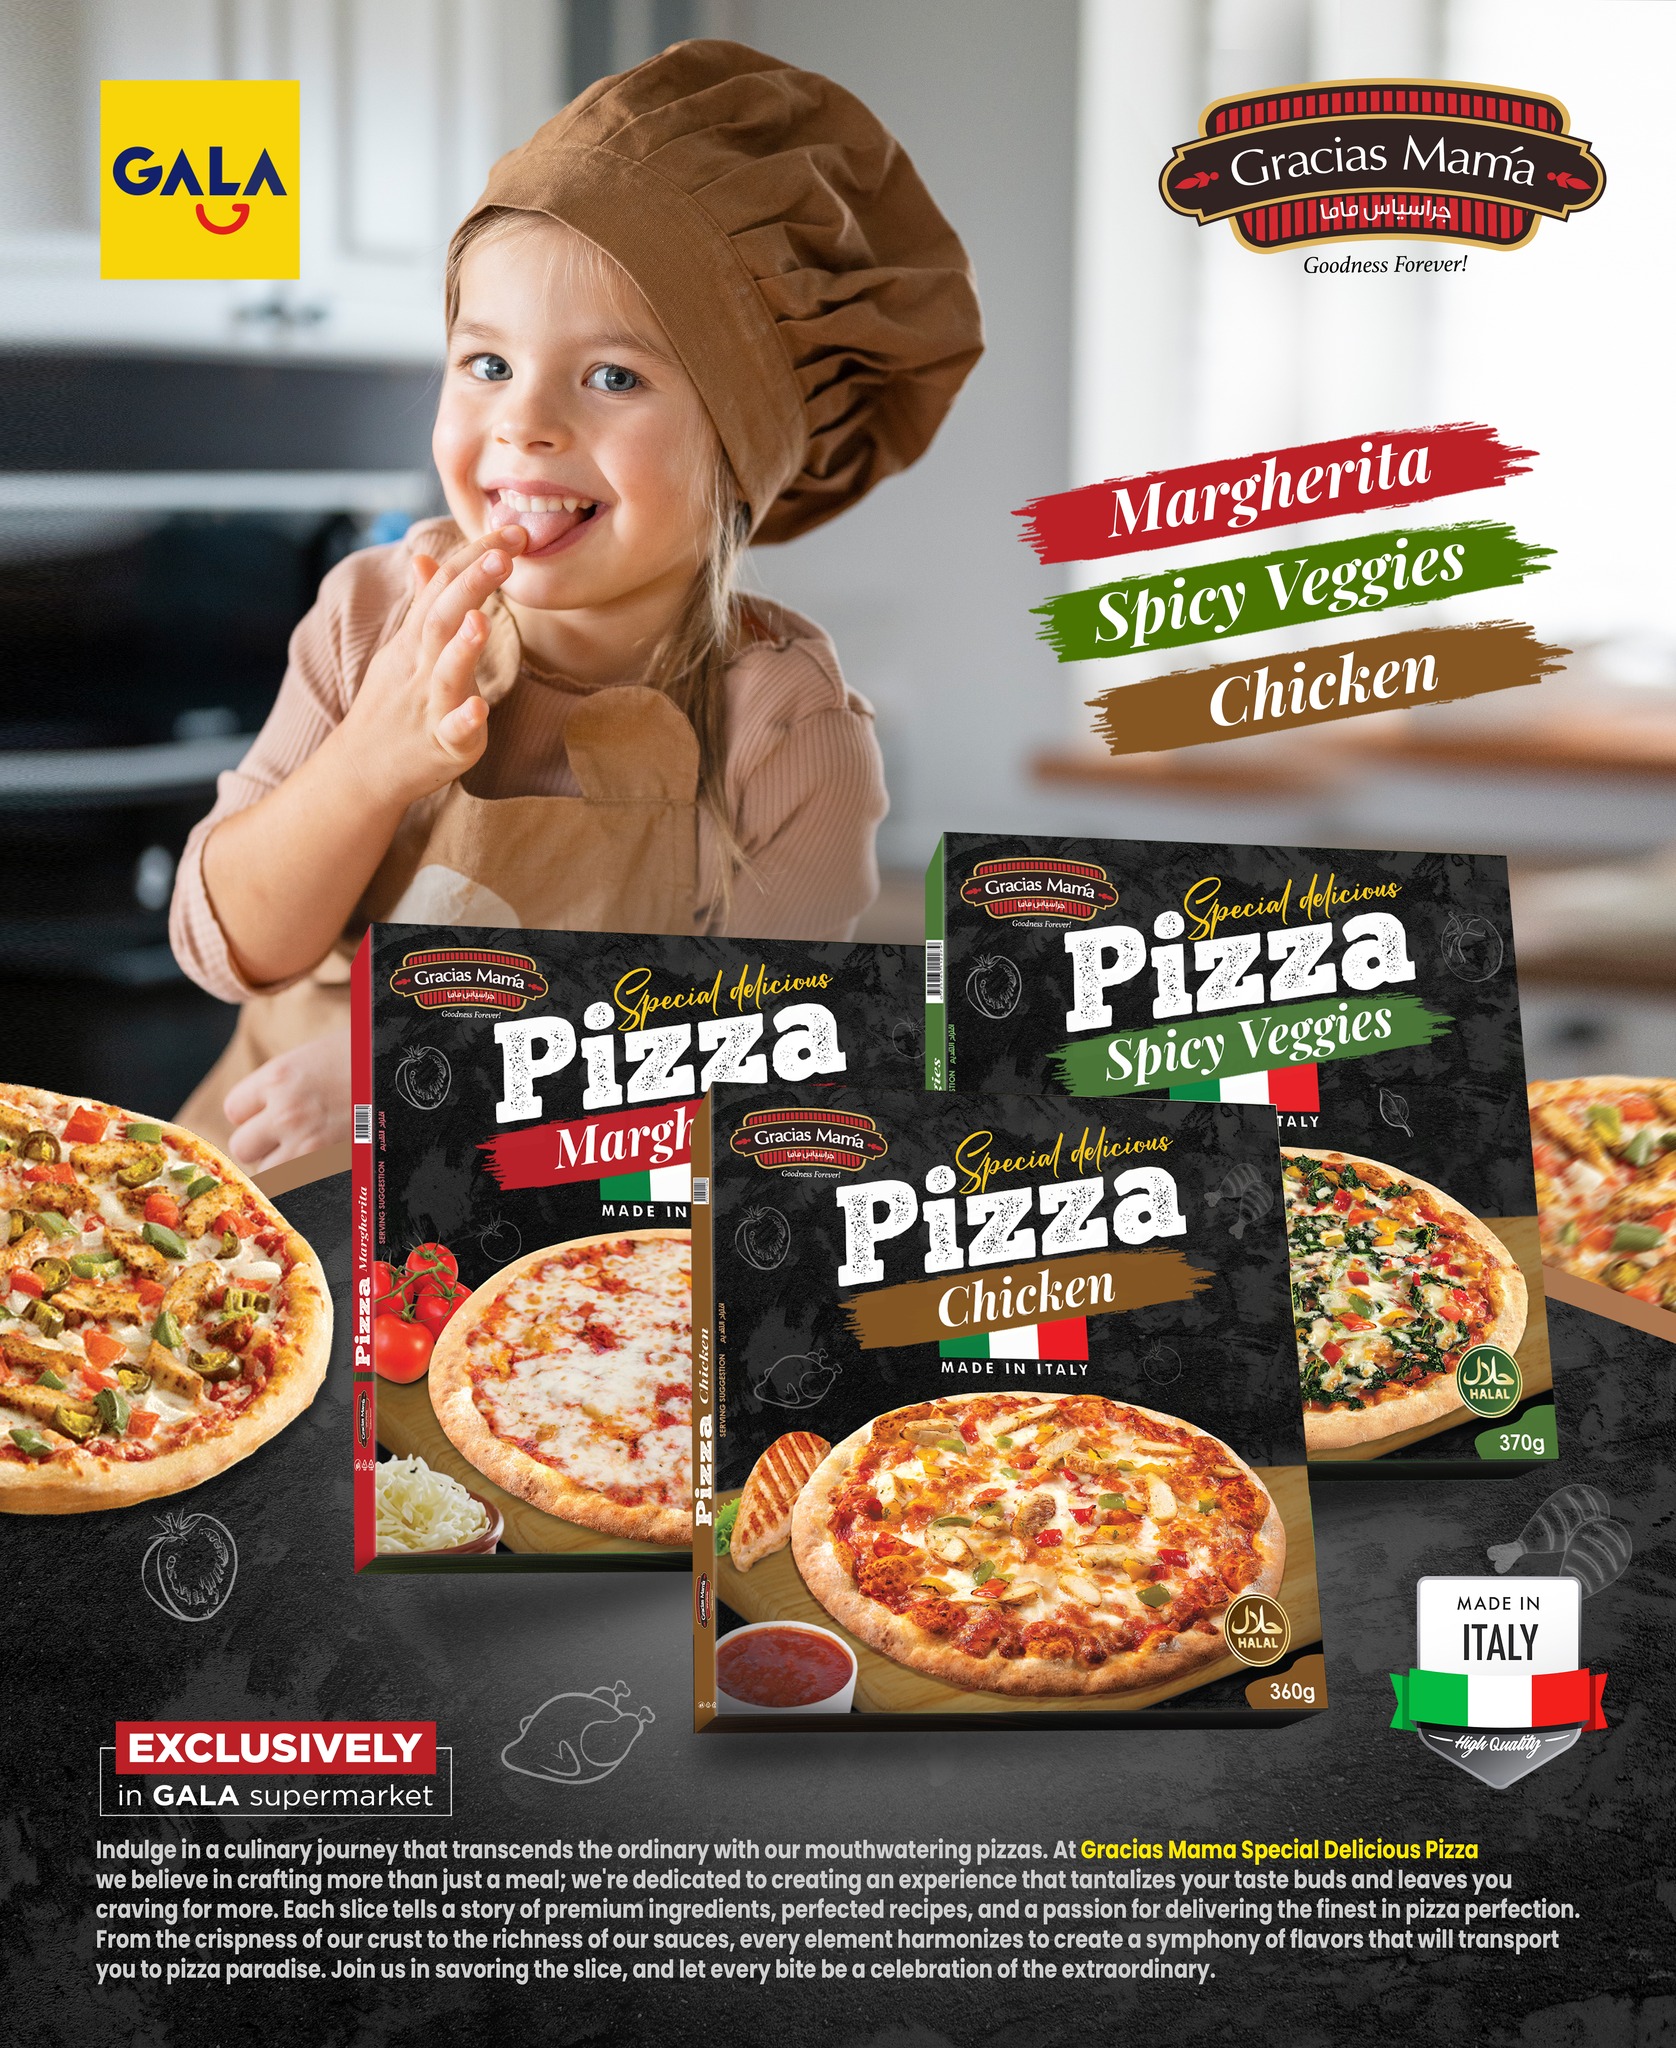 Gracias Mama Special Delicious Pizza, now available at Gala Supermarkets Special Offers